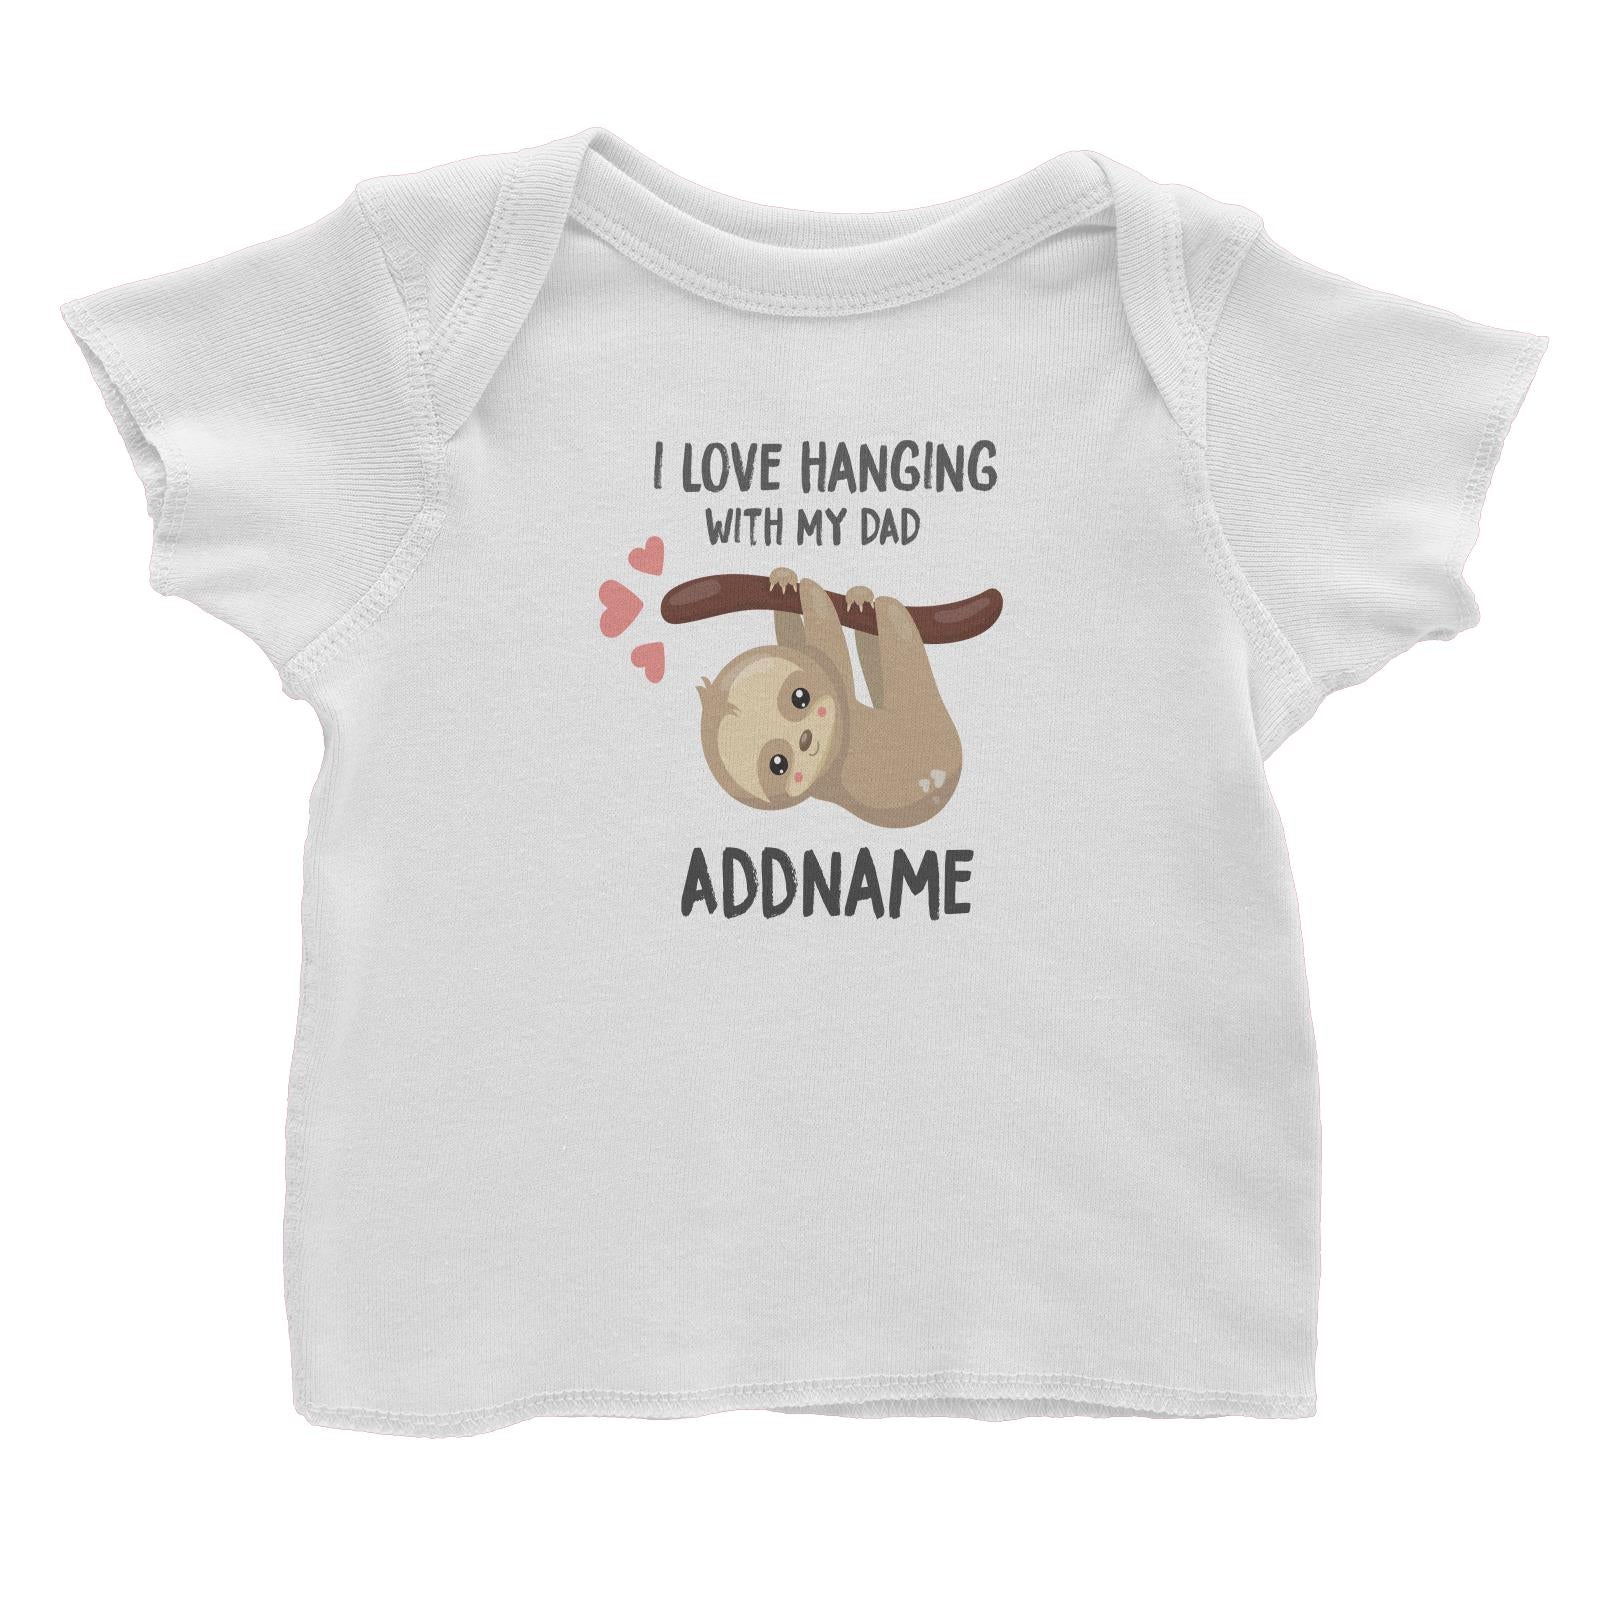 Cute Sloth I Love Hanging With My Dad Addname Baby T-Shirt